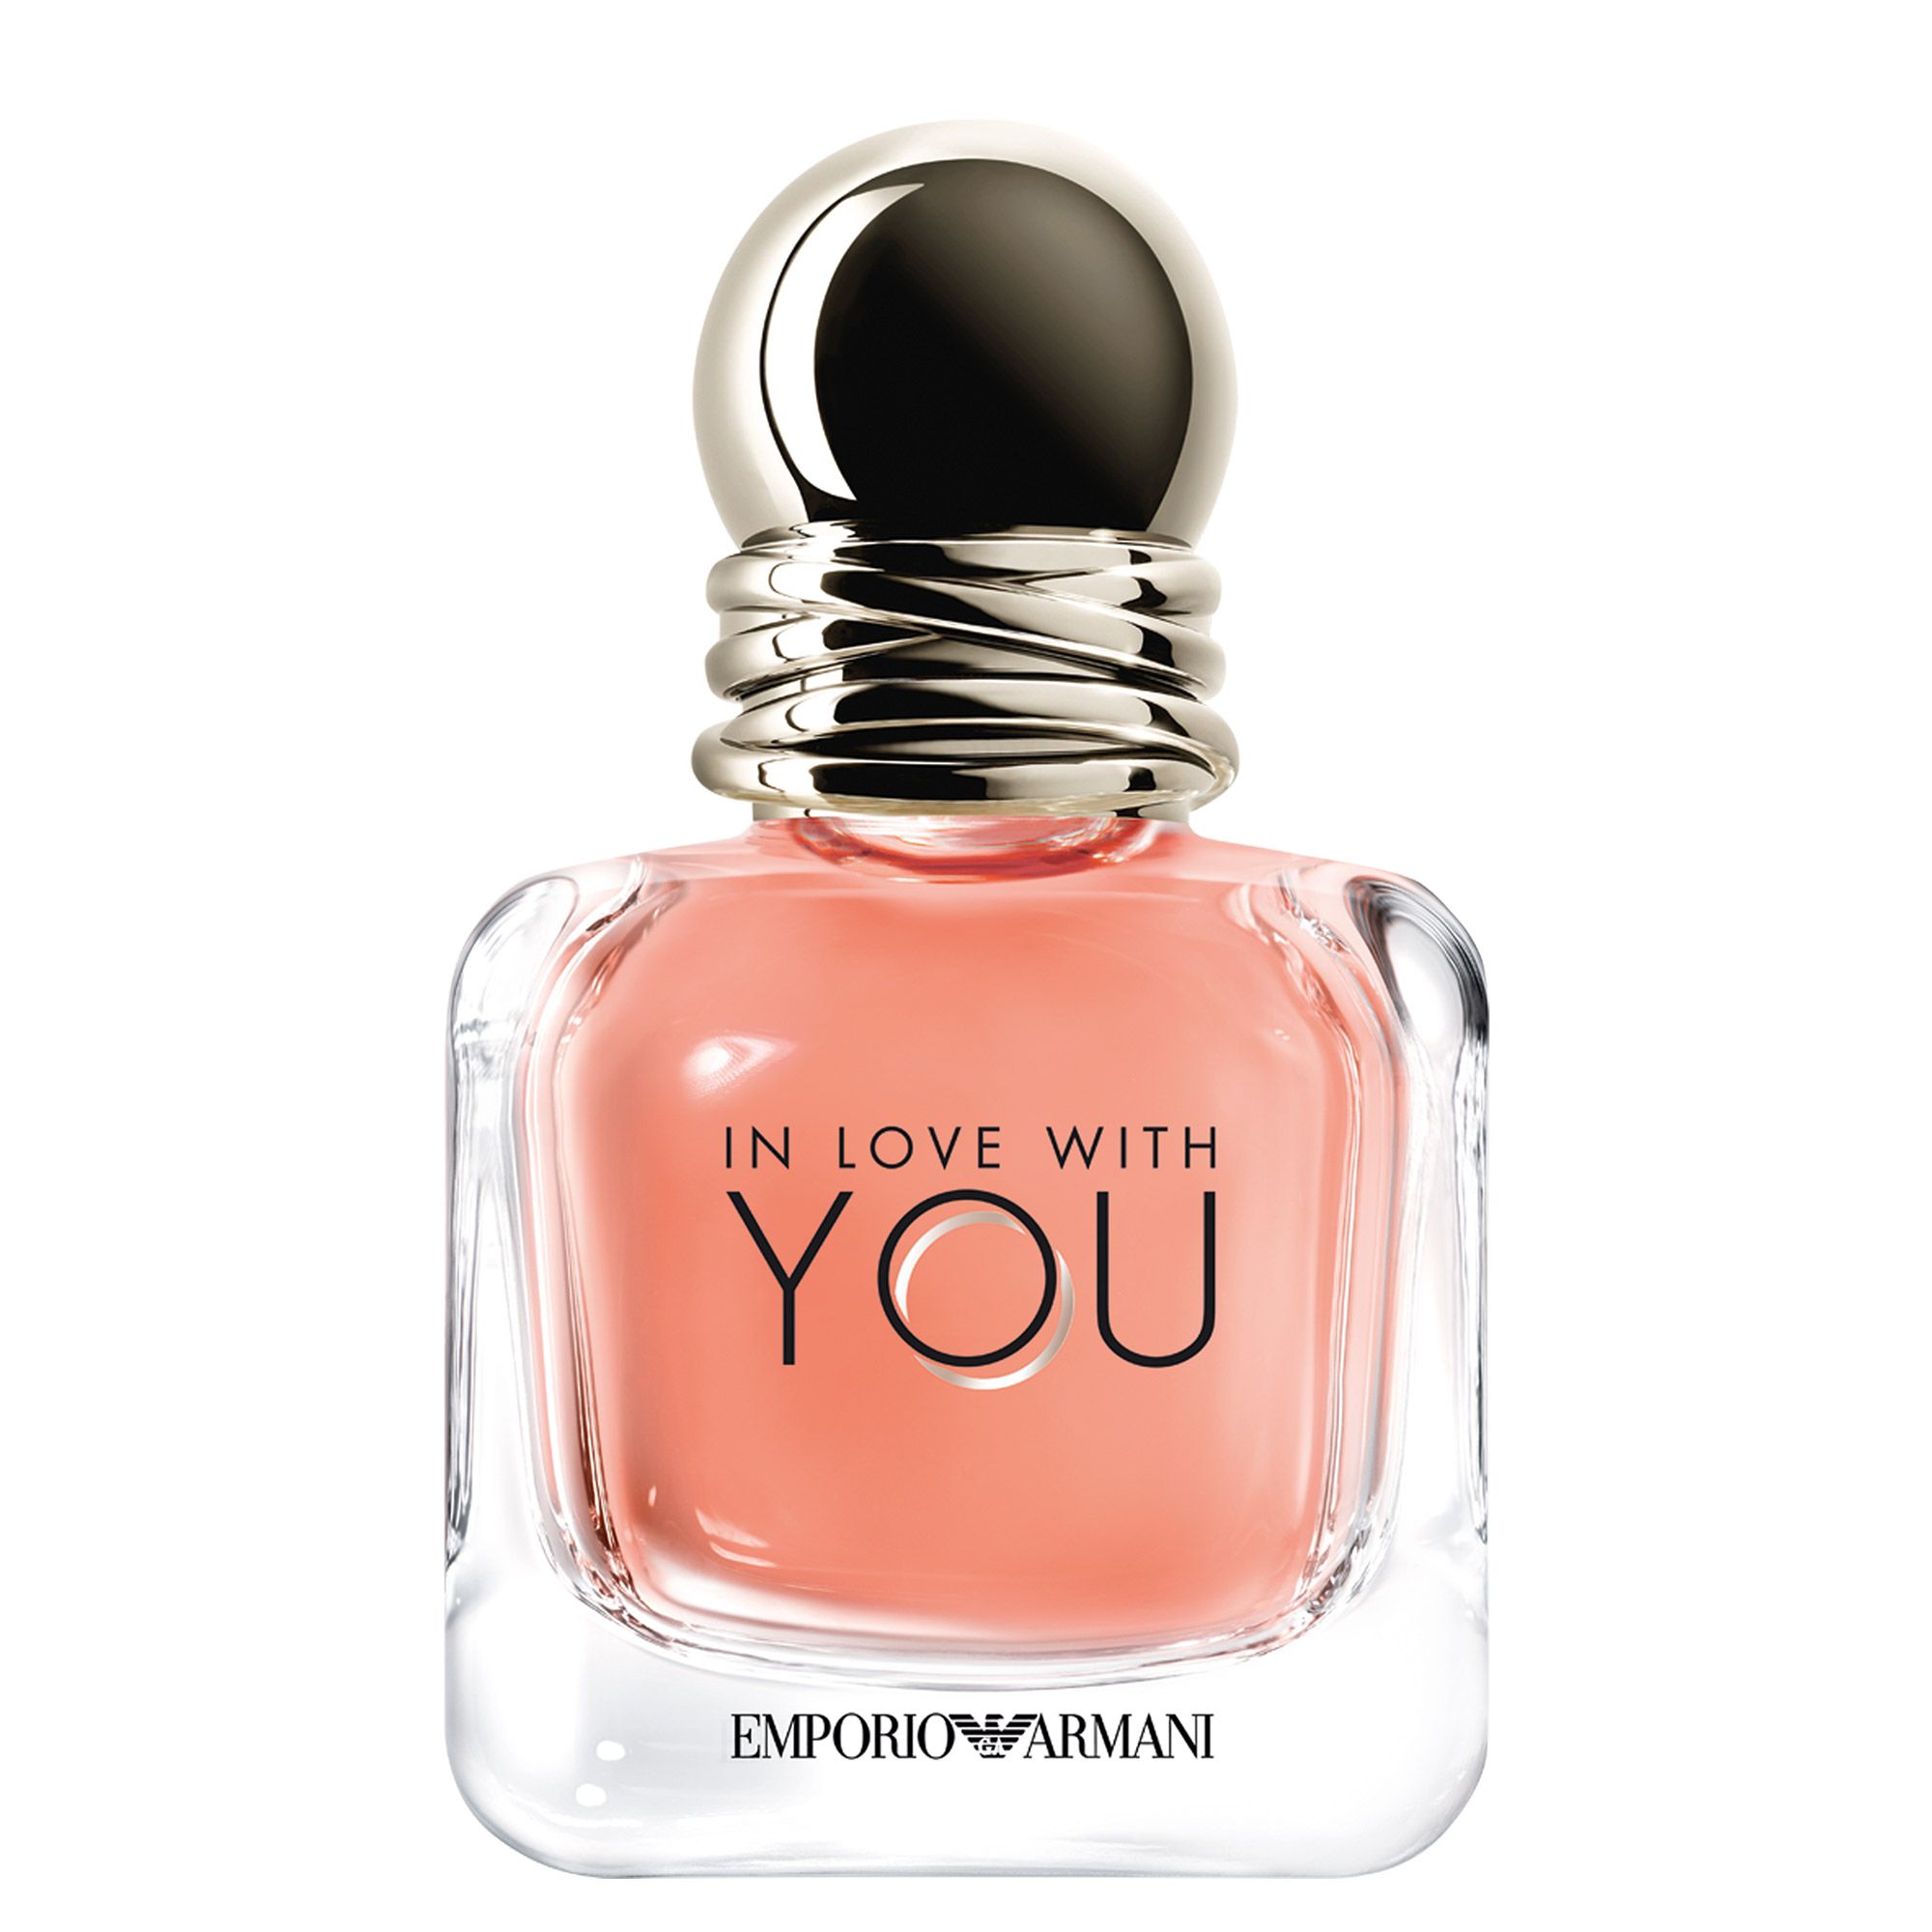  In Love With You Intensely She Eau de Parfum